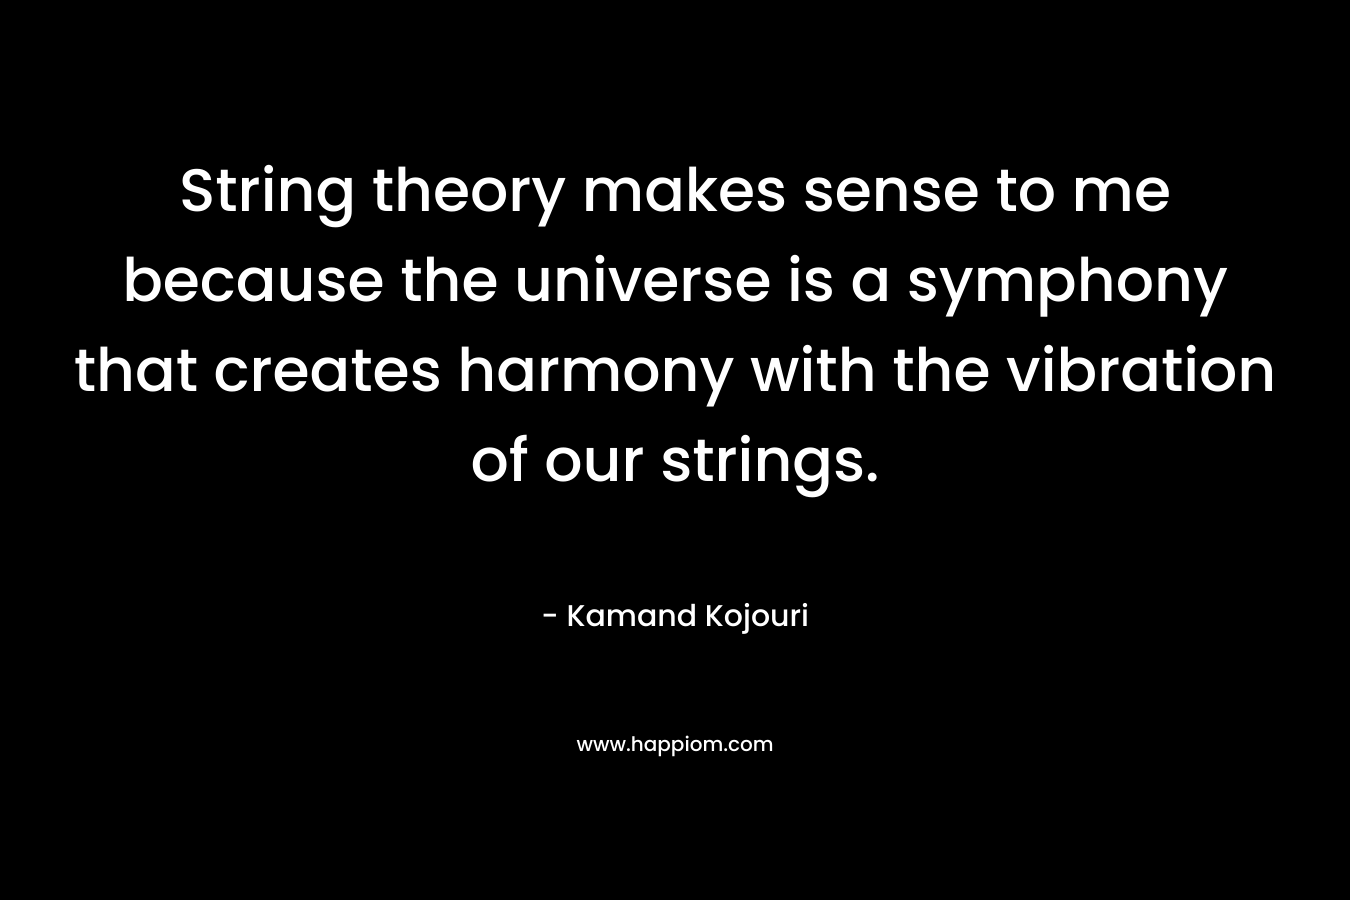 String theory makes sense to me because the universe is a symphony that creates harmony with the vibration of our strings.